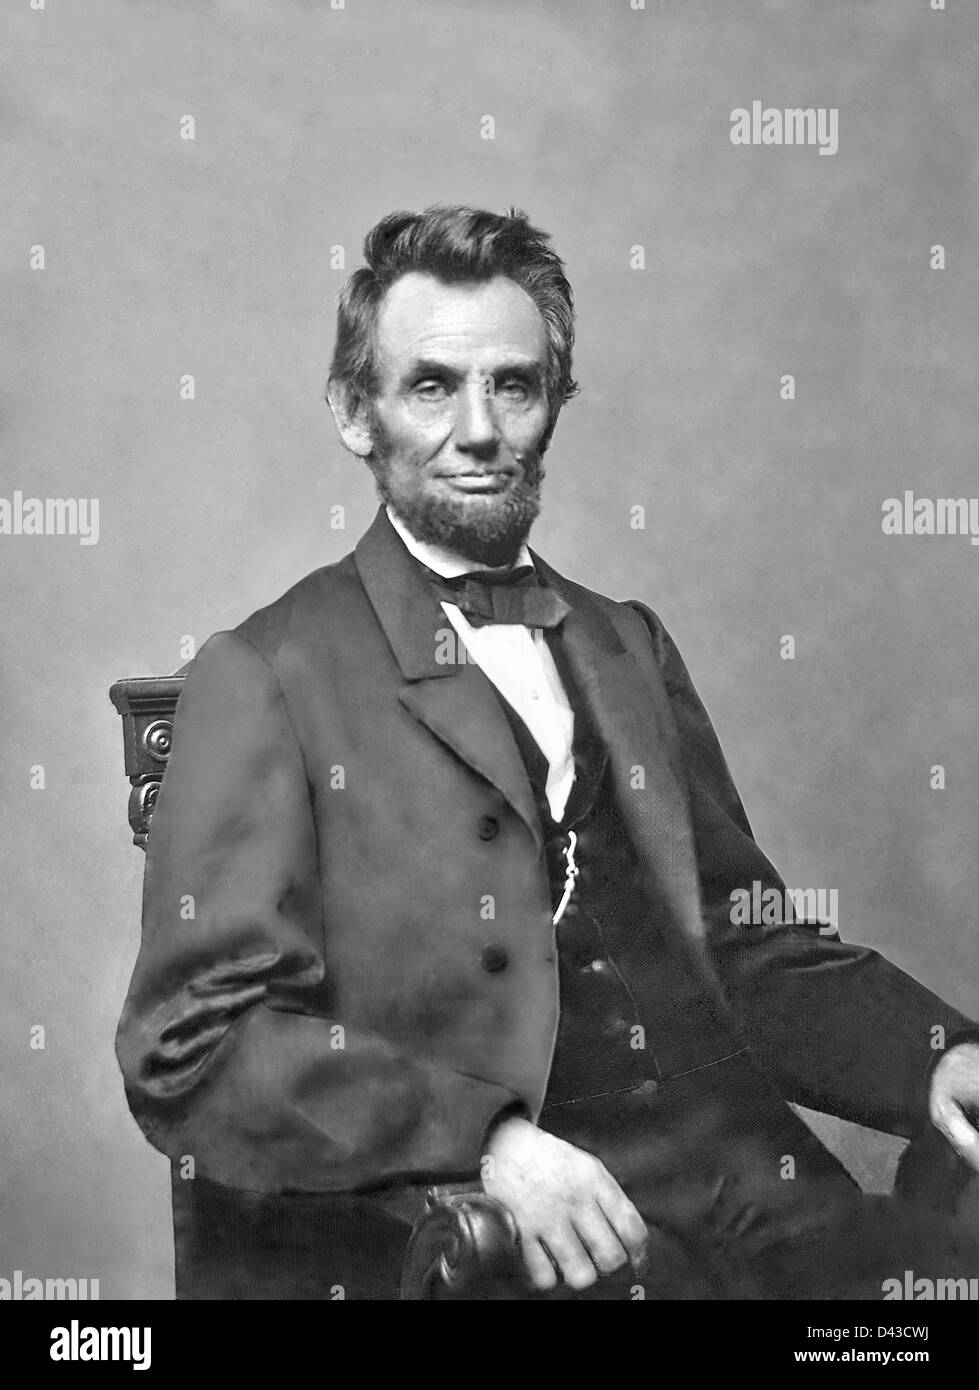 Portrait of President Abraham Lincoln by Mathew Brady 1860. Retouched from original to remove artifacts. Stock Photo